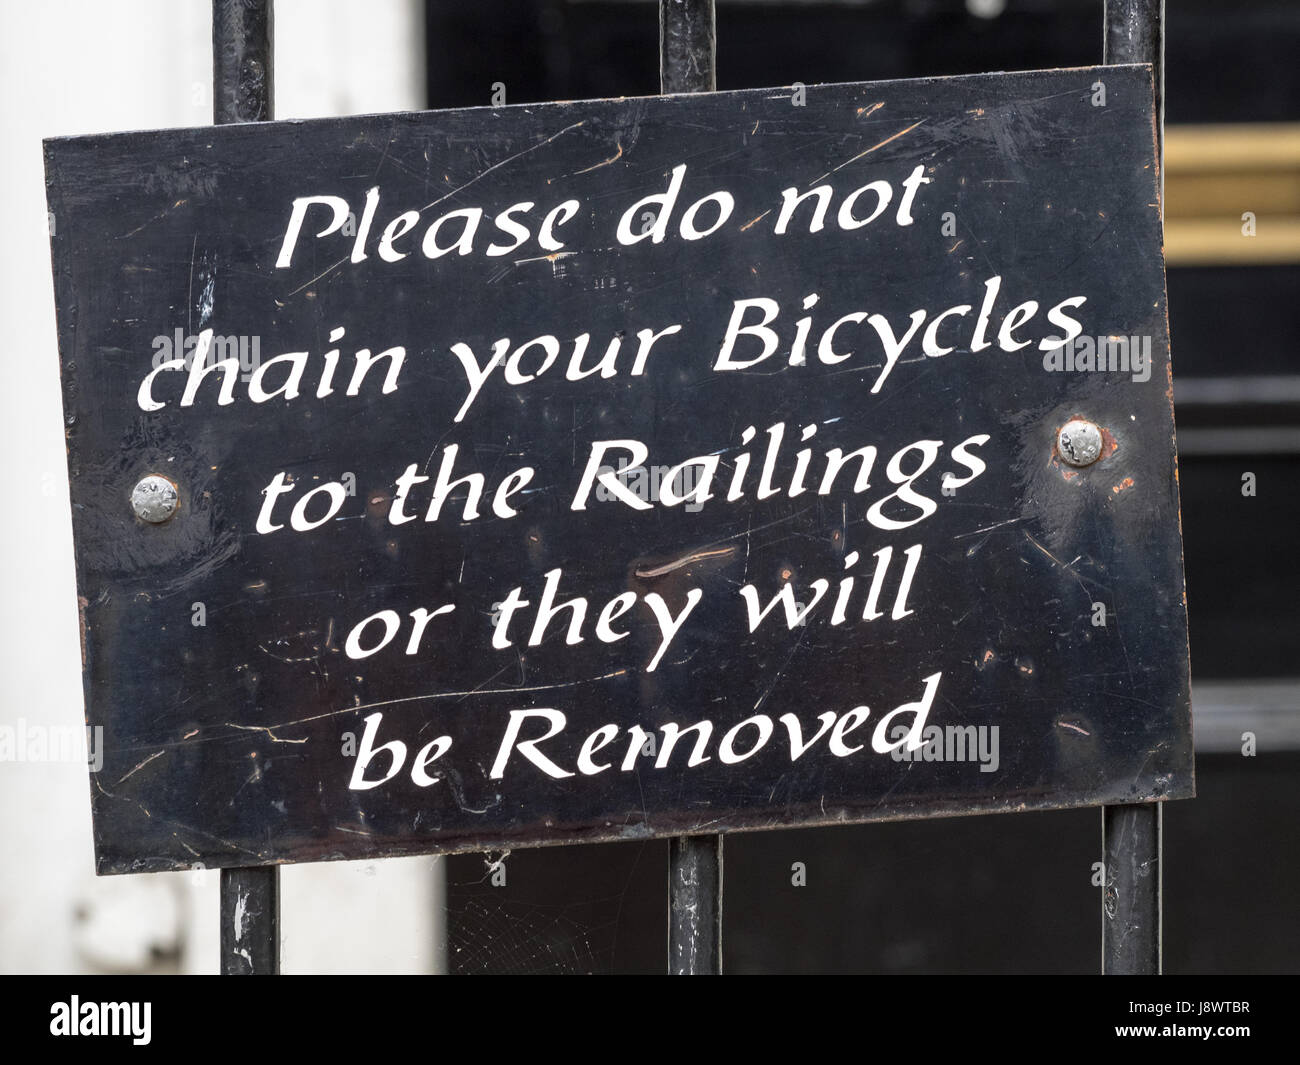 Lopsided sign asking not to chain bikes to the railings Stock Photo